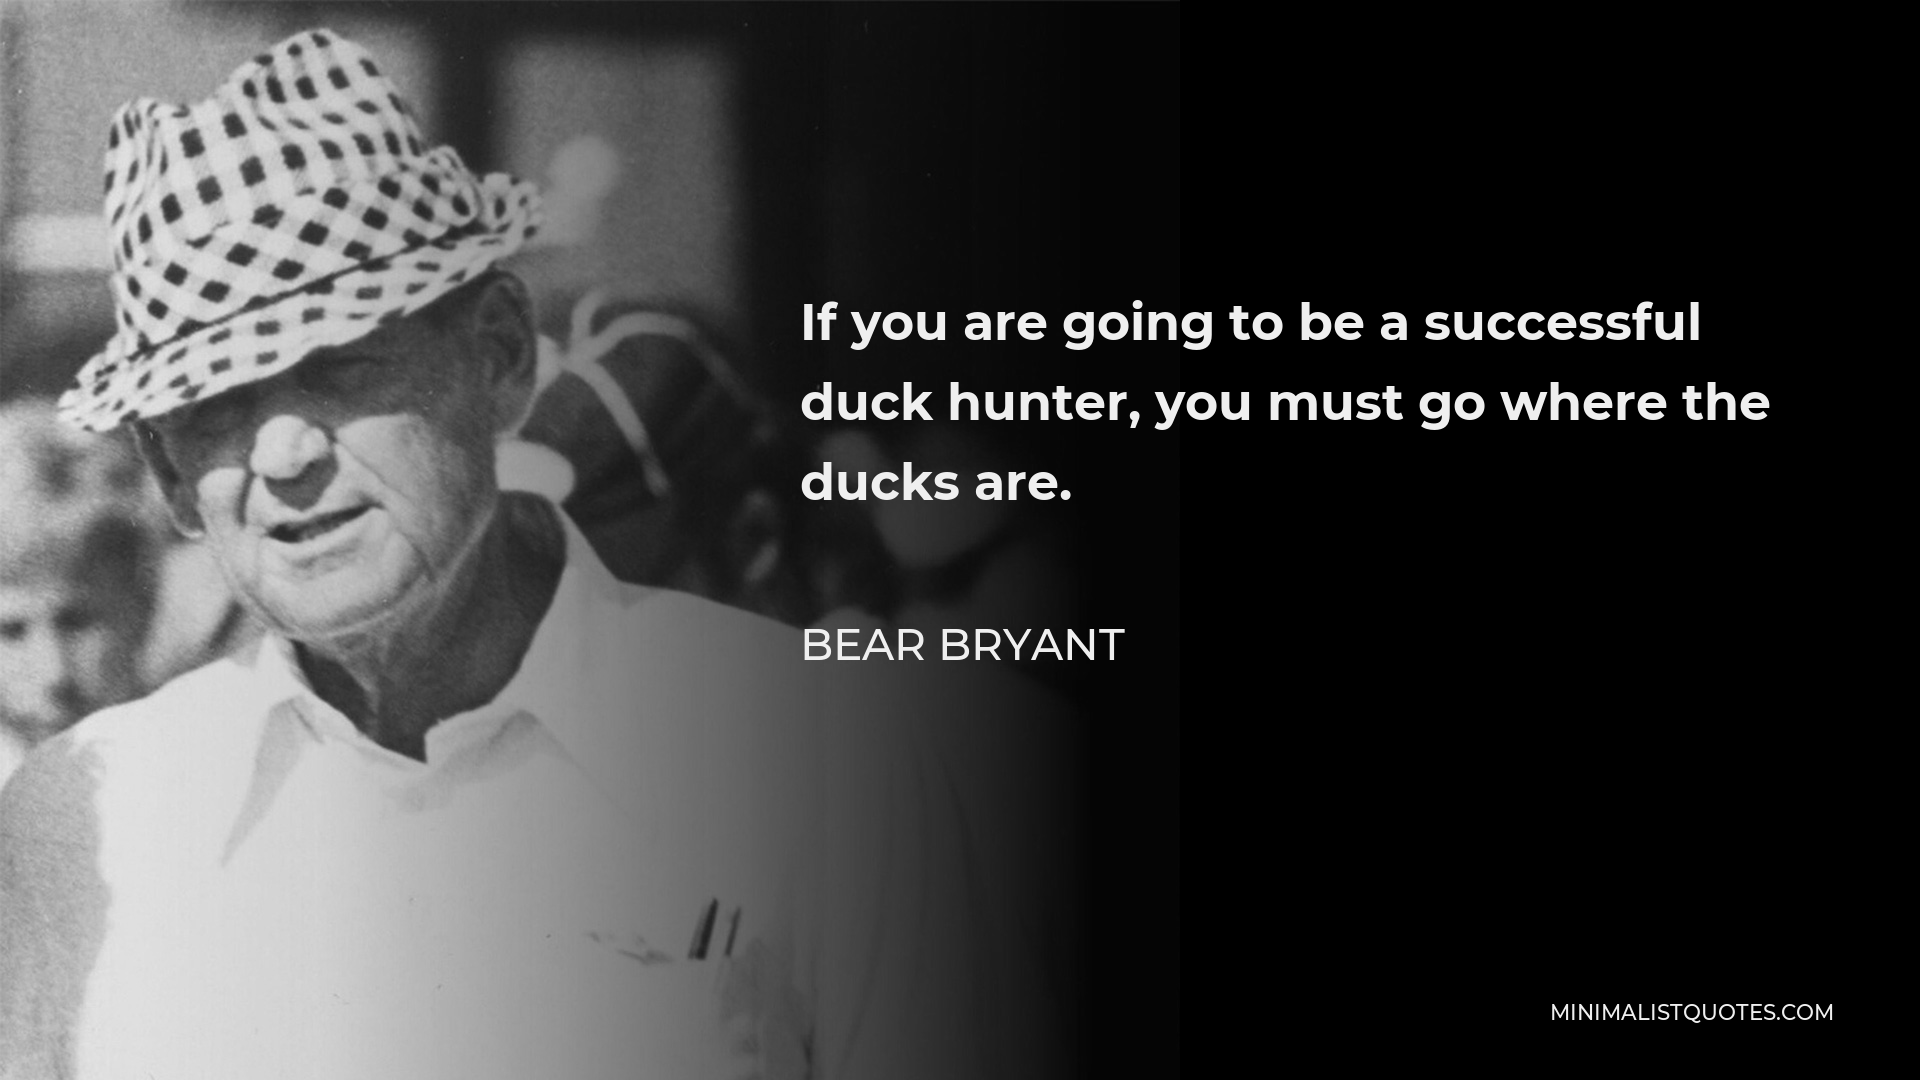 Bear Bryant Quote - If you are going to be a successful duck hunter, you must go where the ducks are.